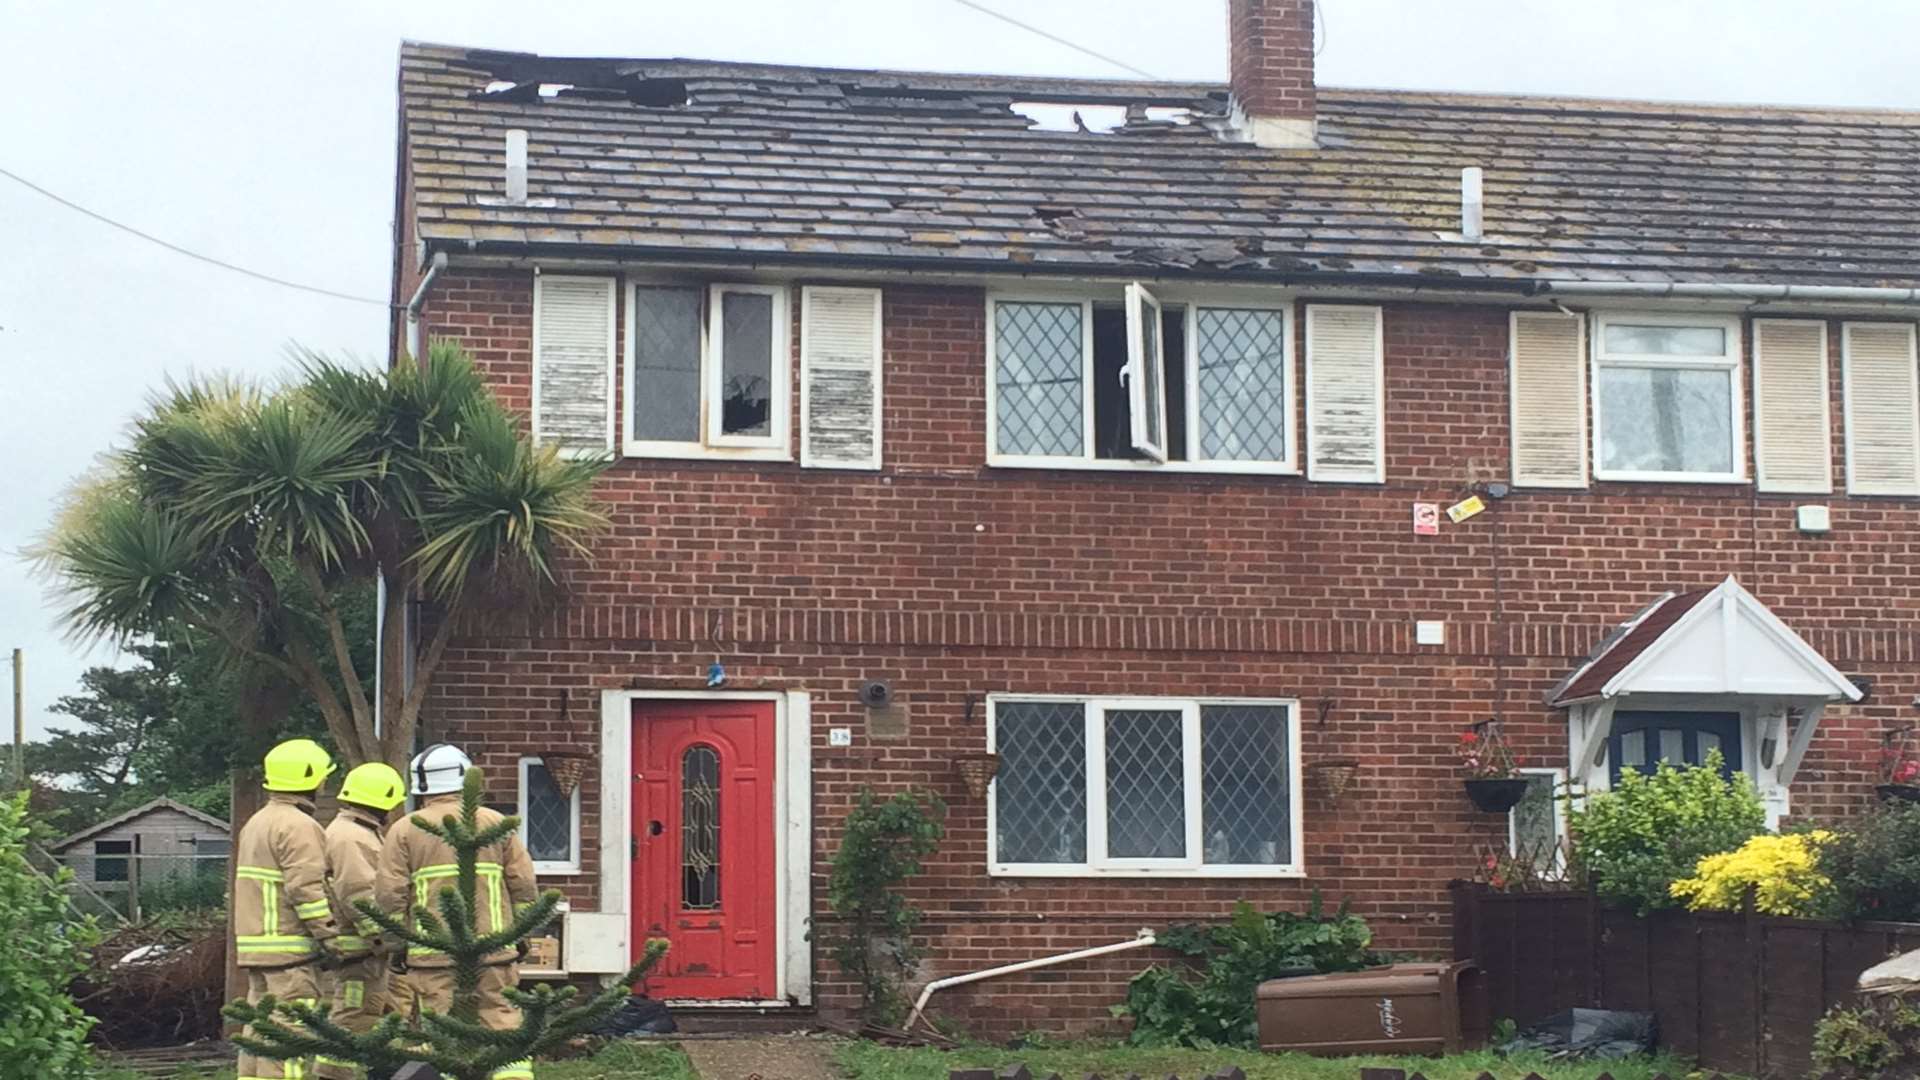 Fire ripped through the house